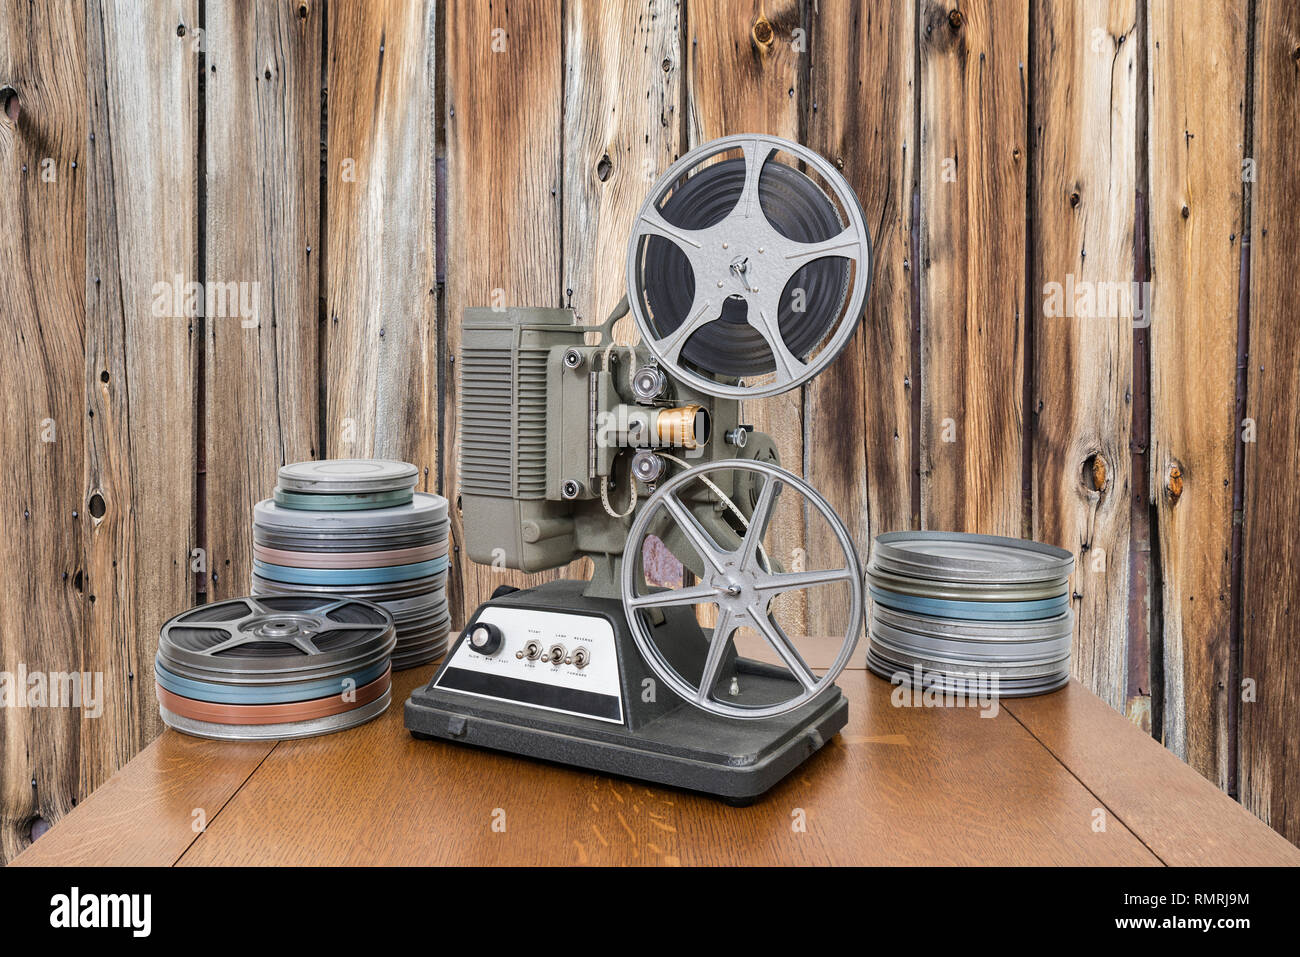 Vintage 8mm home movie projector and film cans with old wood wall. Stock Photo